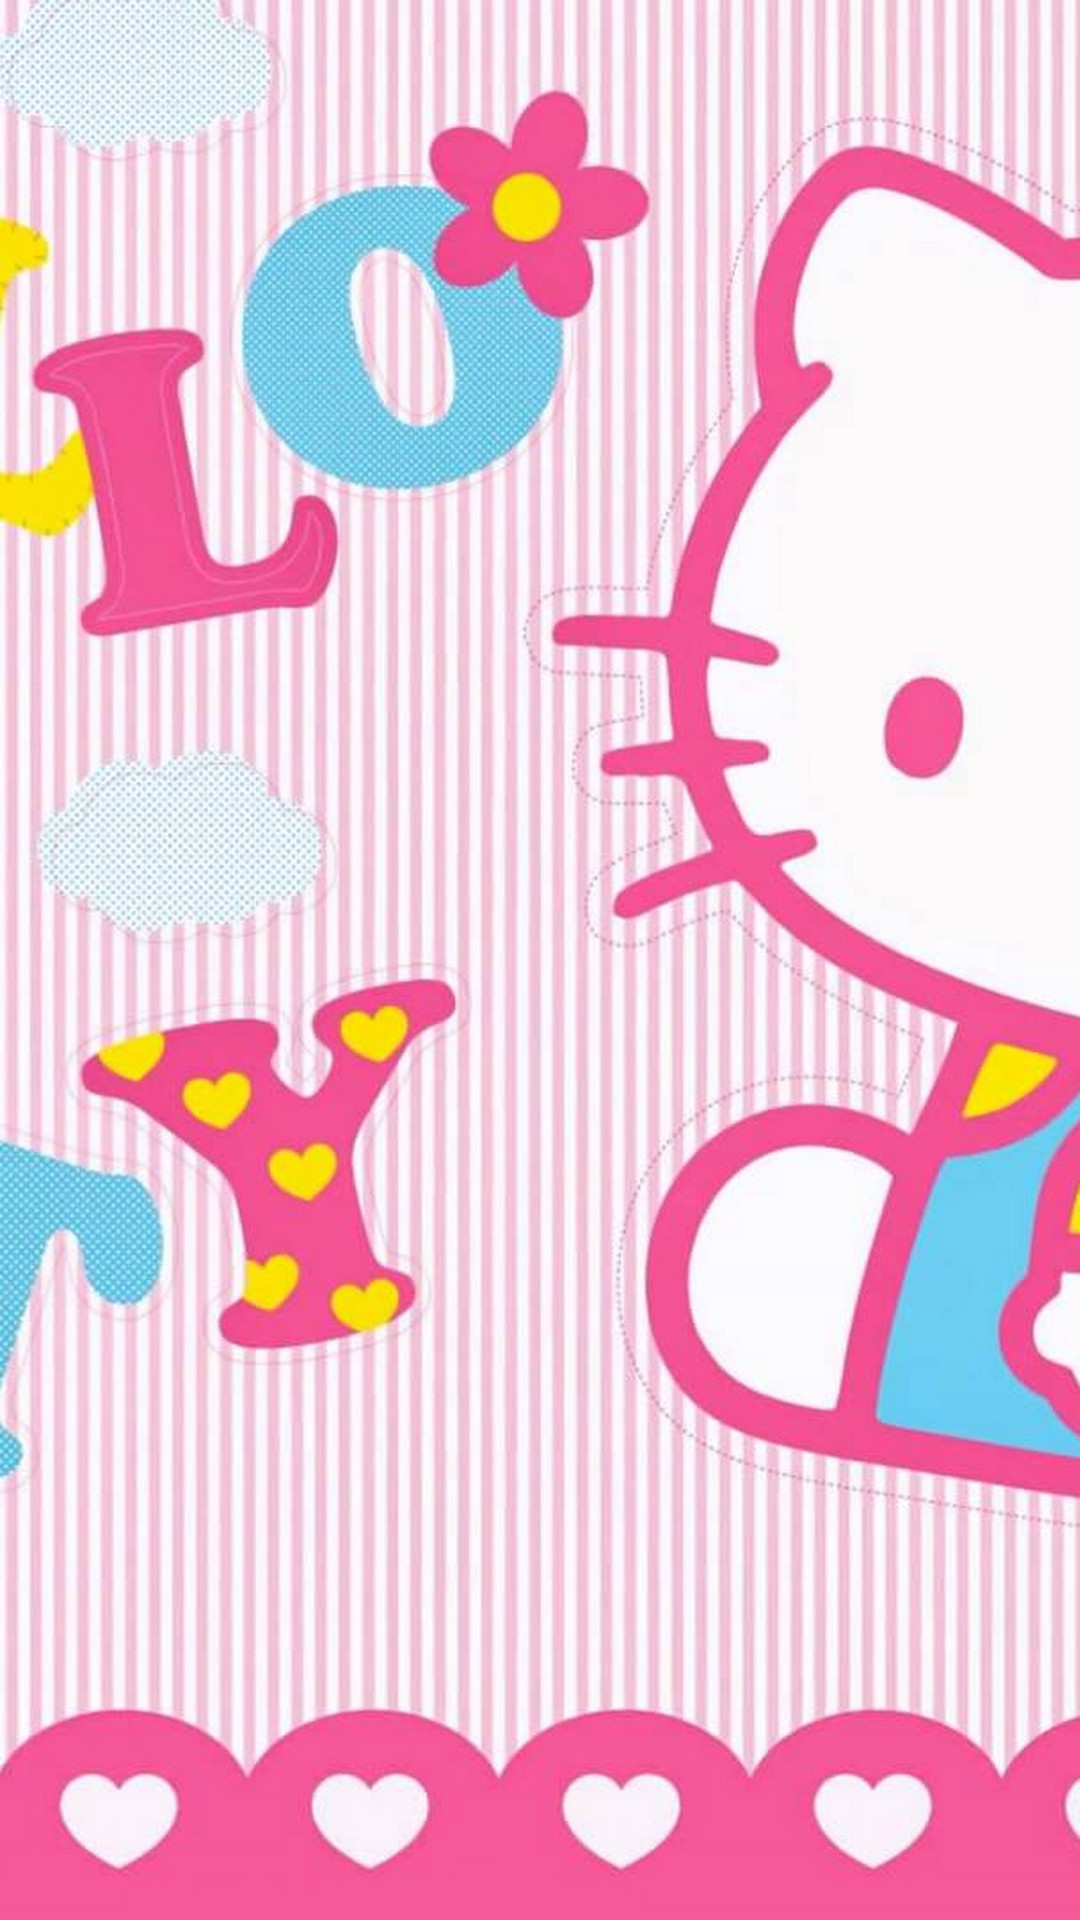 Hello Kitty Phone Backgrounds With Resolution 1080X1920 pixel. You can make this wallpaper for your Desktop Computer Backgrounds, Mac Wallpapers, Android Lock screen or iPhone Screensavers